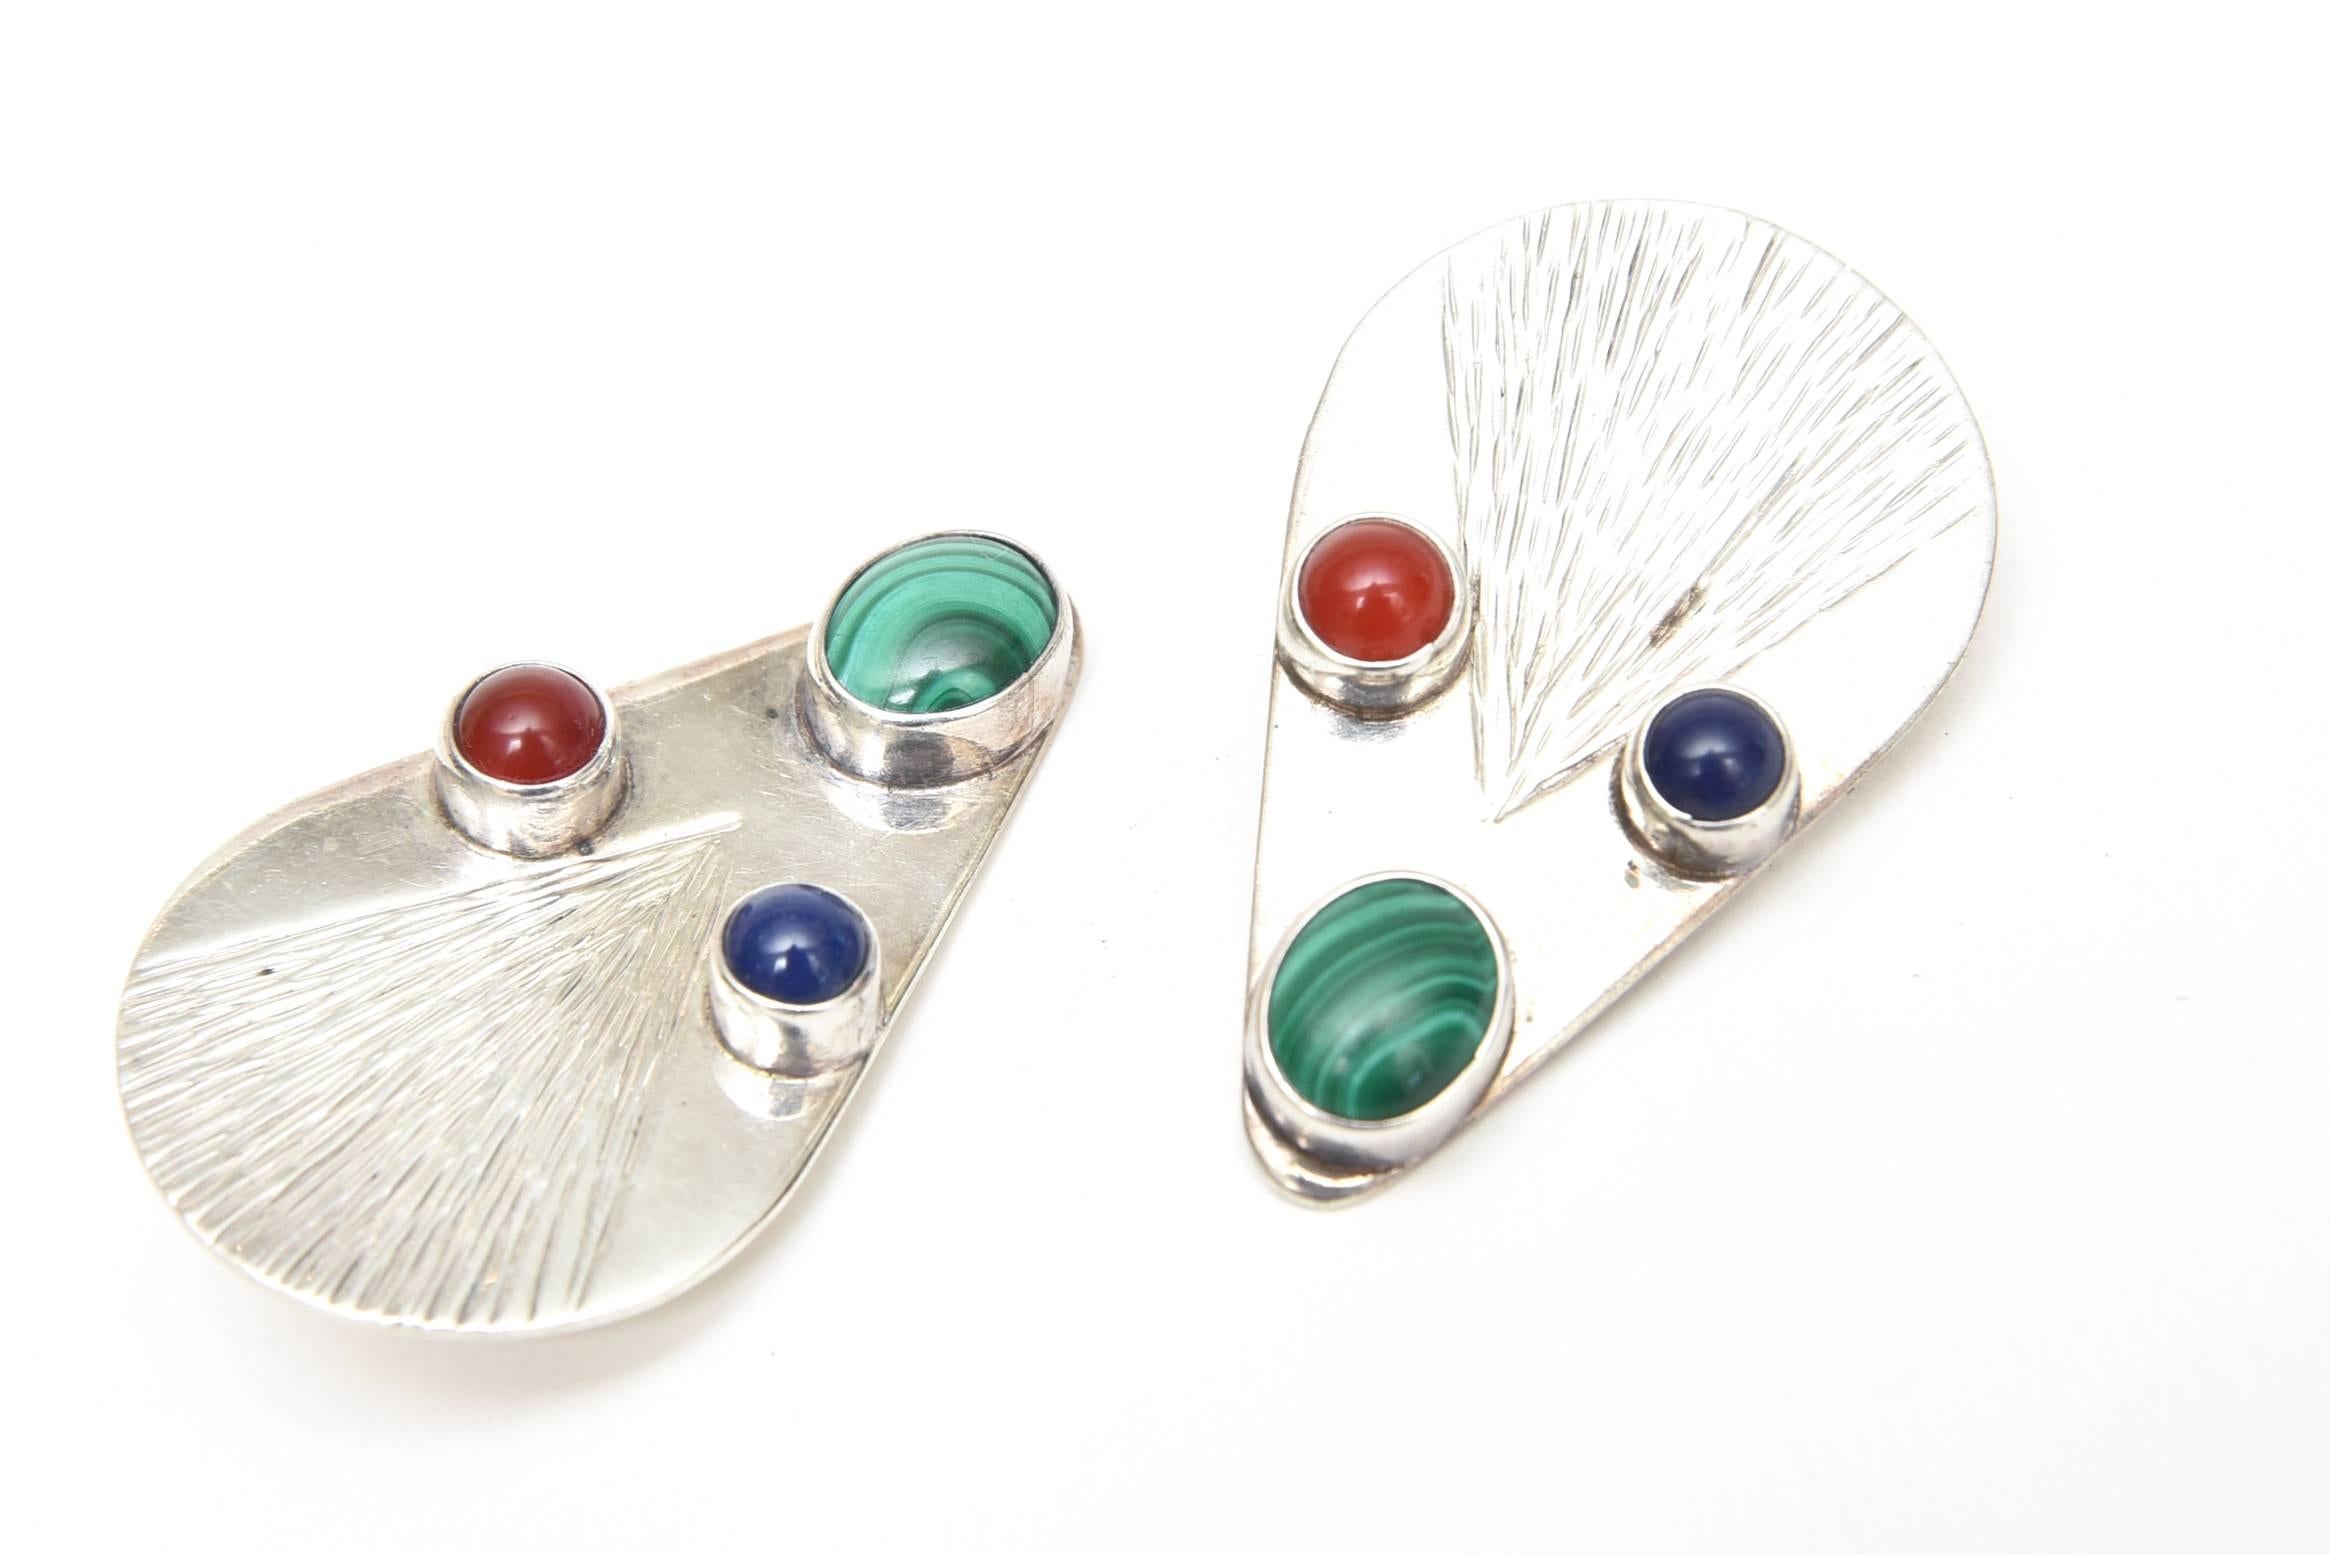 These lovely pair of vintage hallmarked sterling silver clip on earrings have cabochon stones. Malachite, carnelian and blue lace agate are set against the sterling silver. They are Mexican and look lovely on the ear. Hallmarked Care numbered and